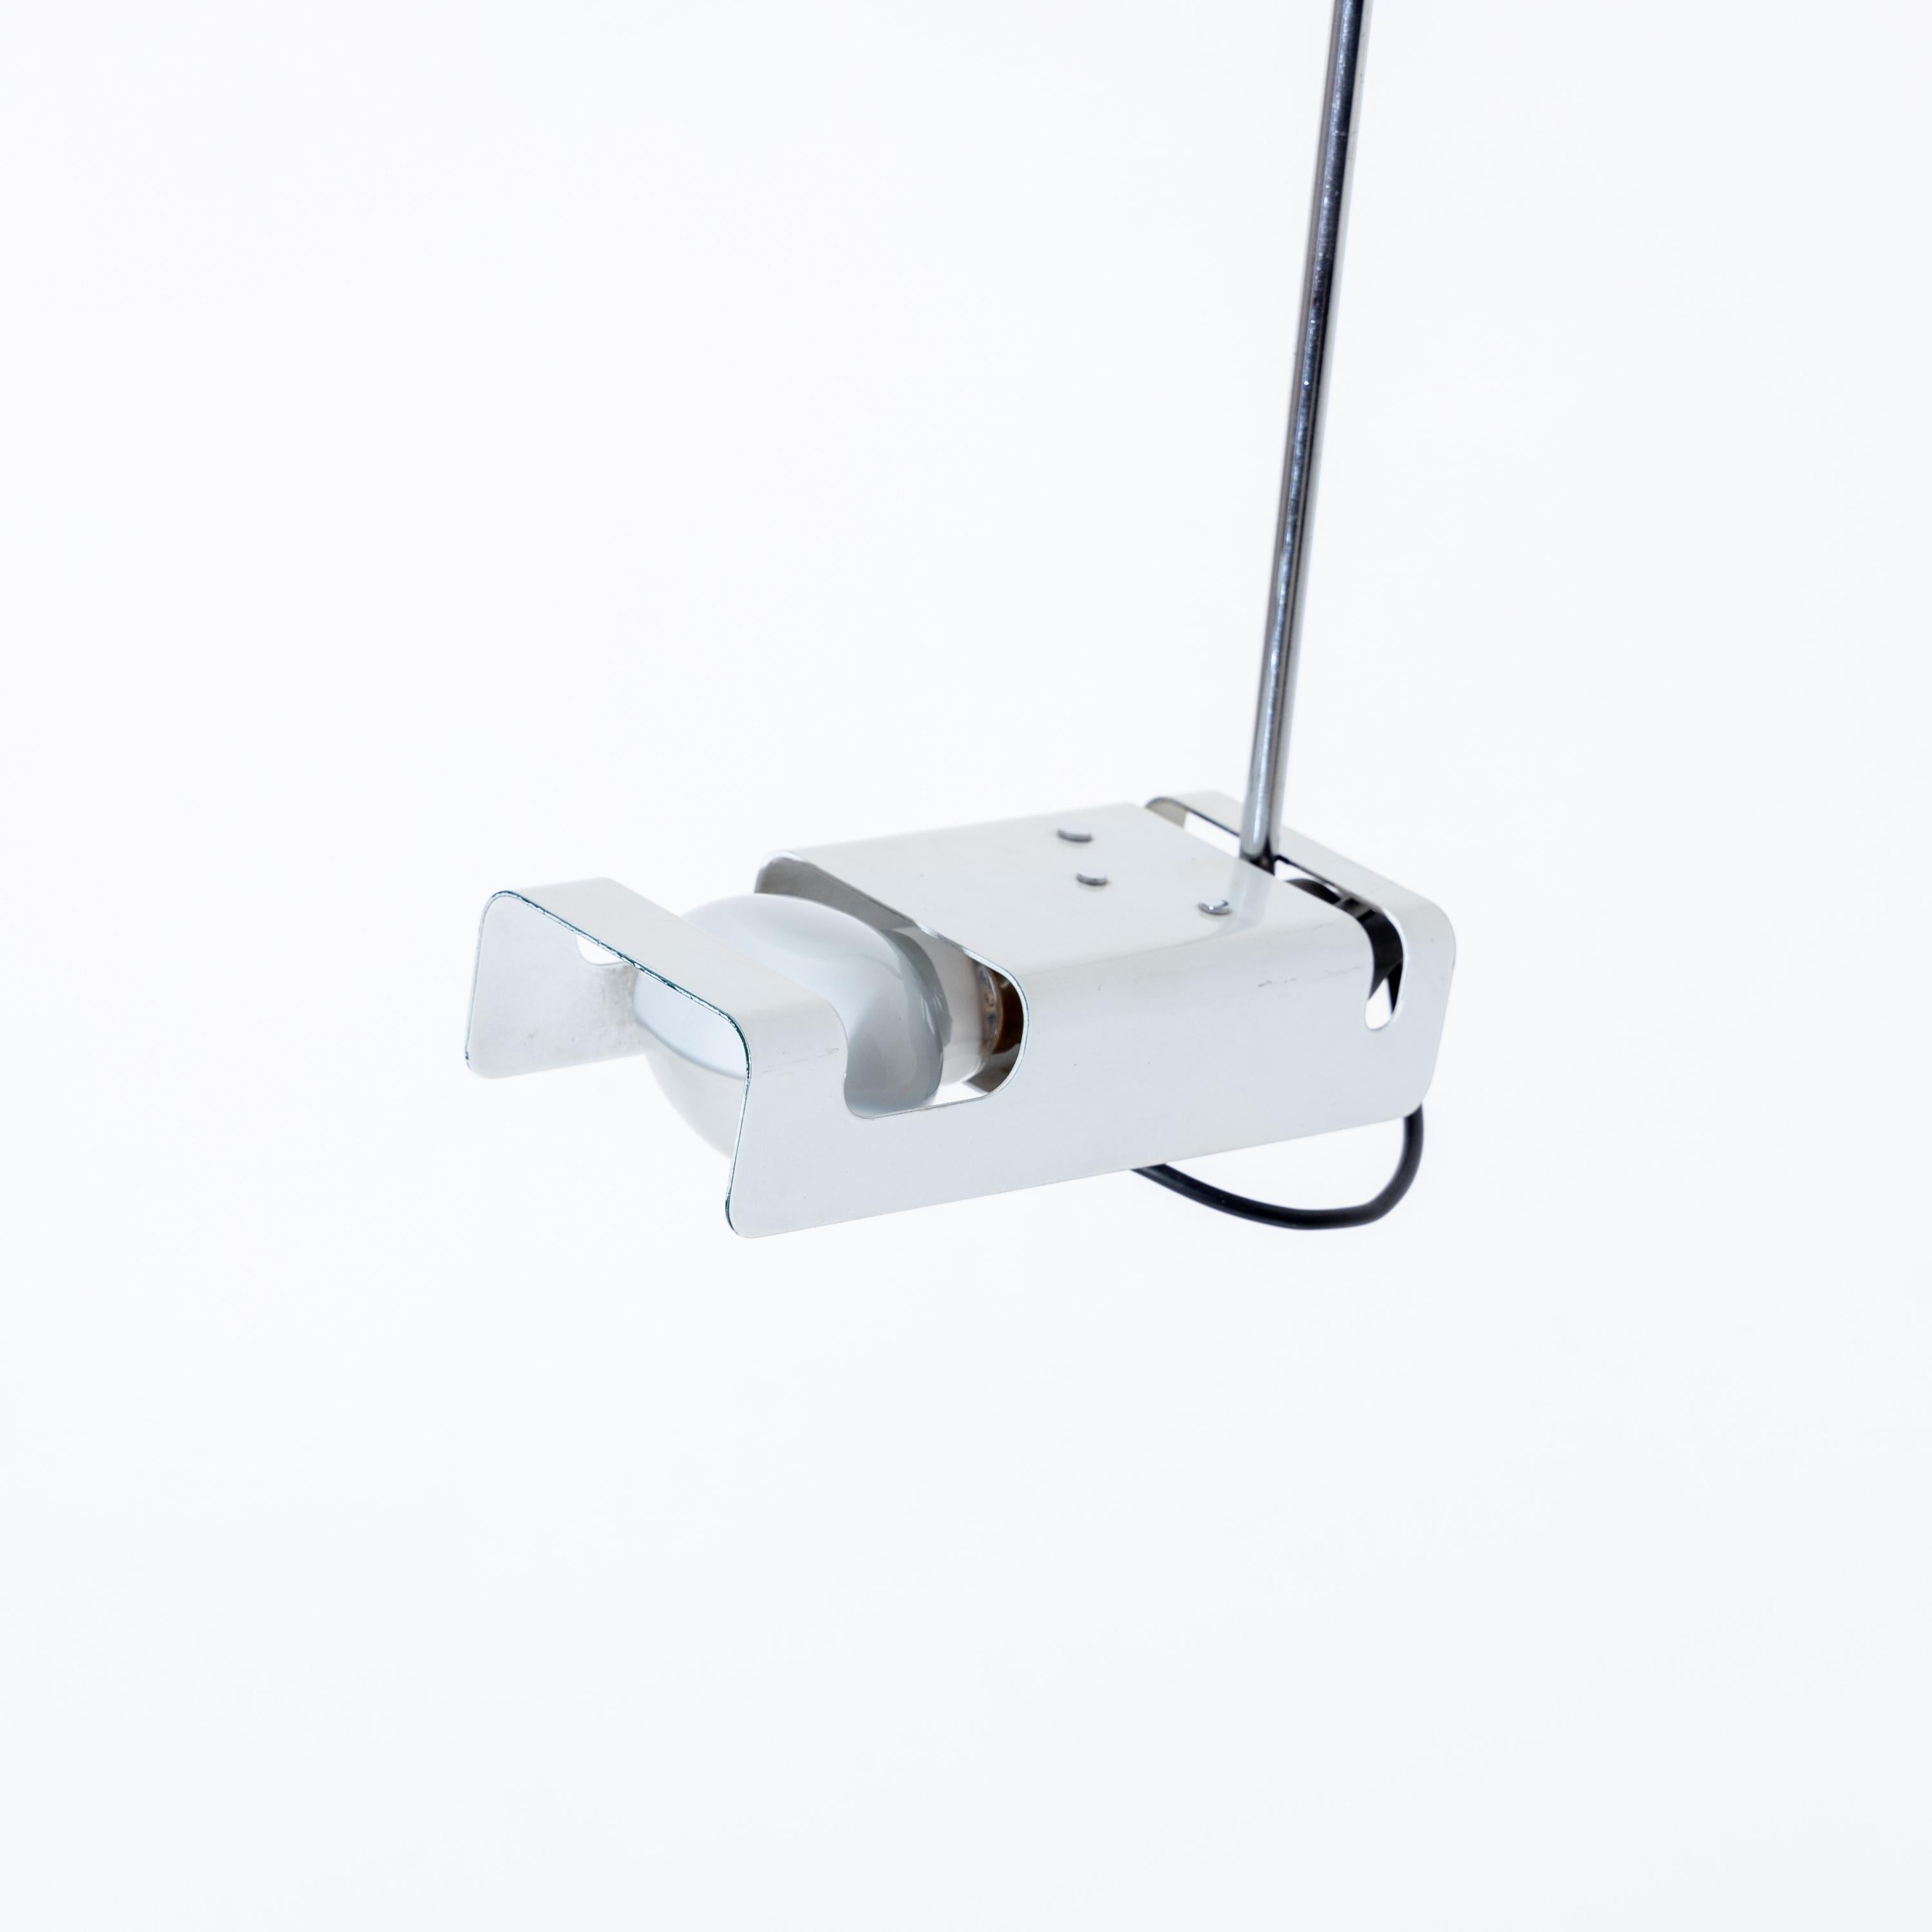 Two ceiling lamps, model 4476 